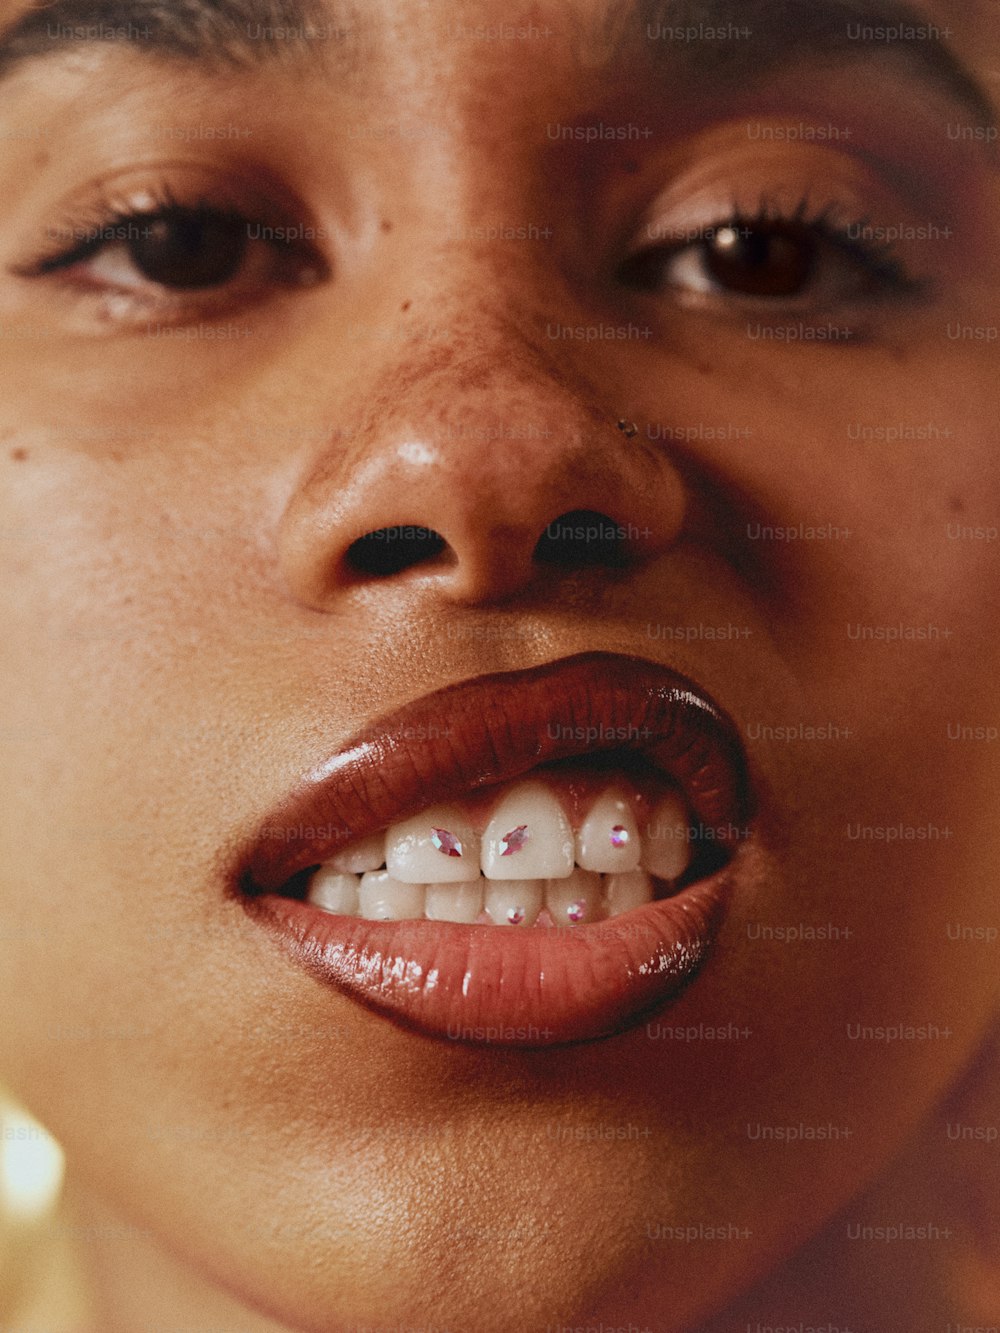 a close up of a woman's mouth with braces